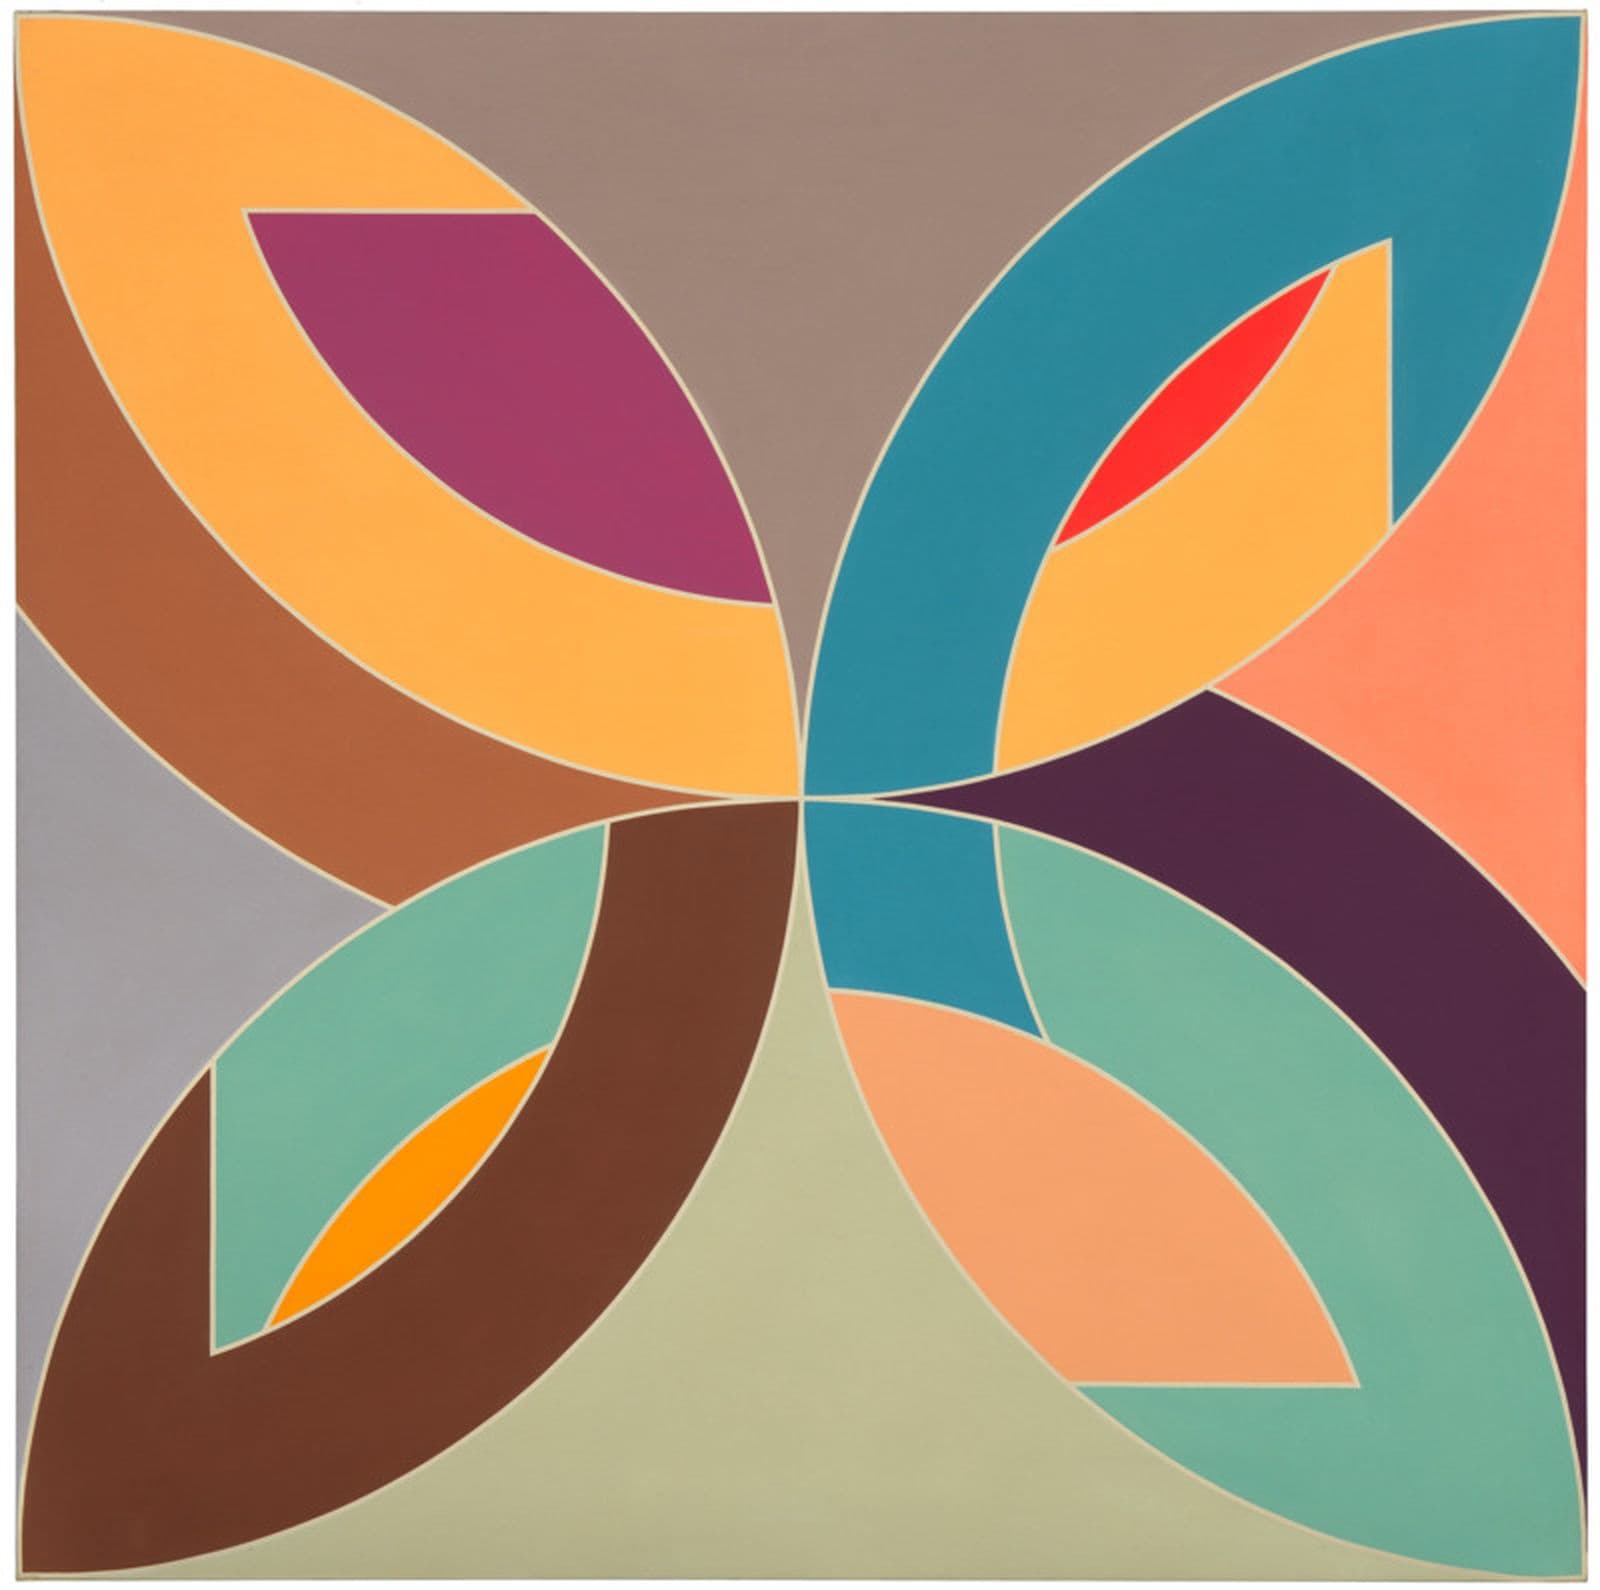 A multi-colour painting of four semi-circular arcs arranged in a floral geometric pattern